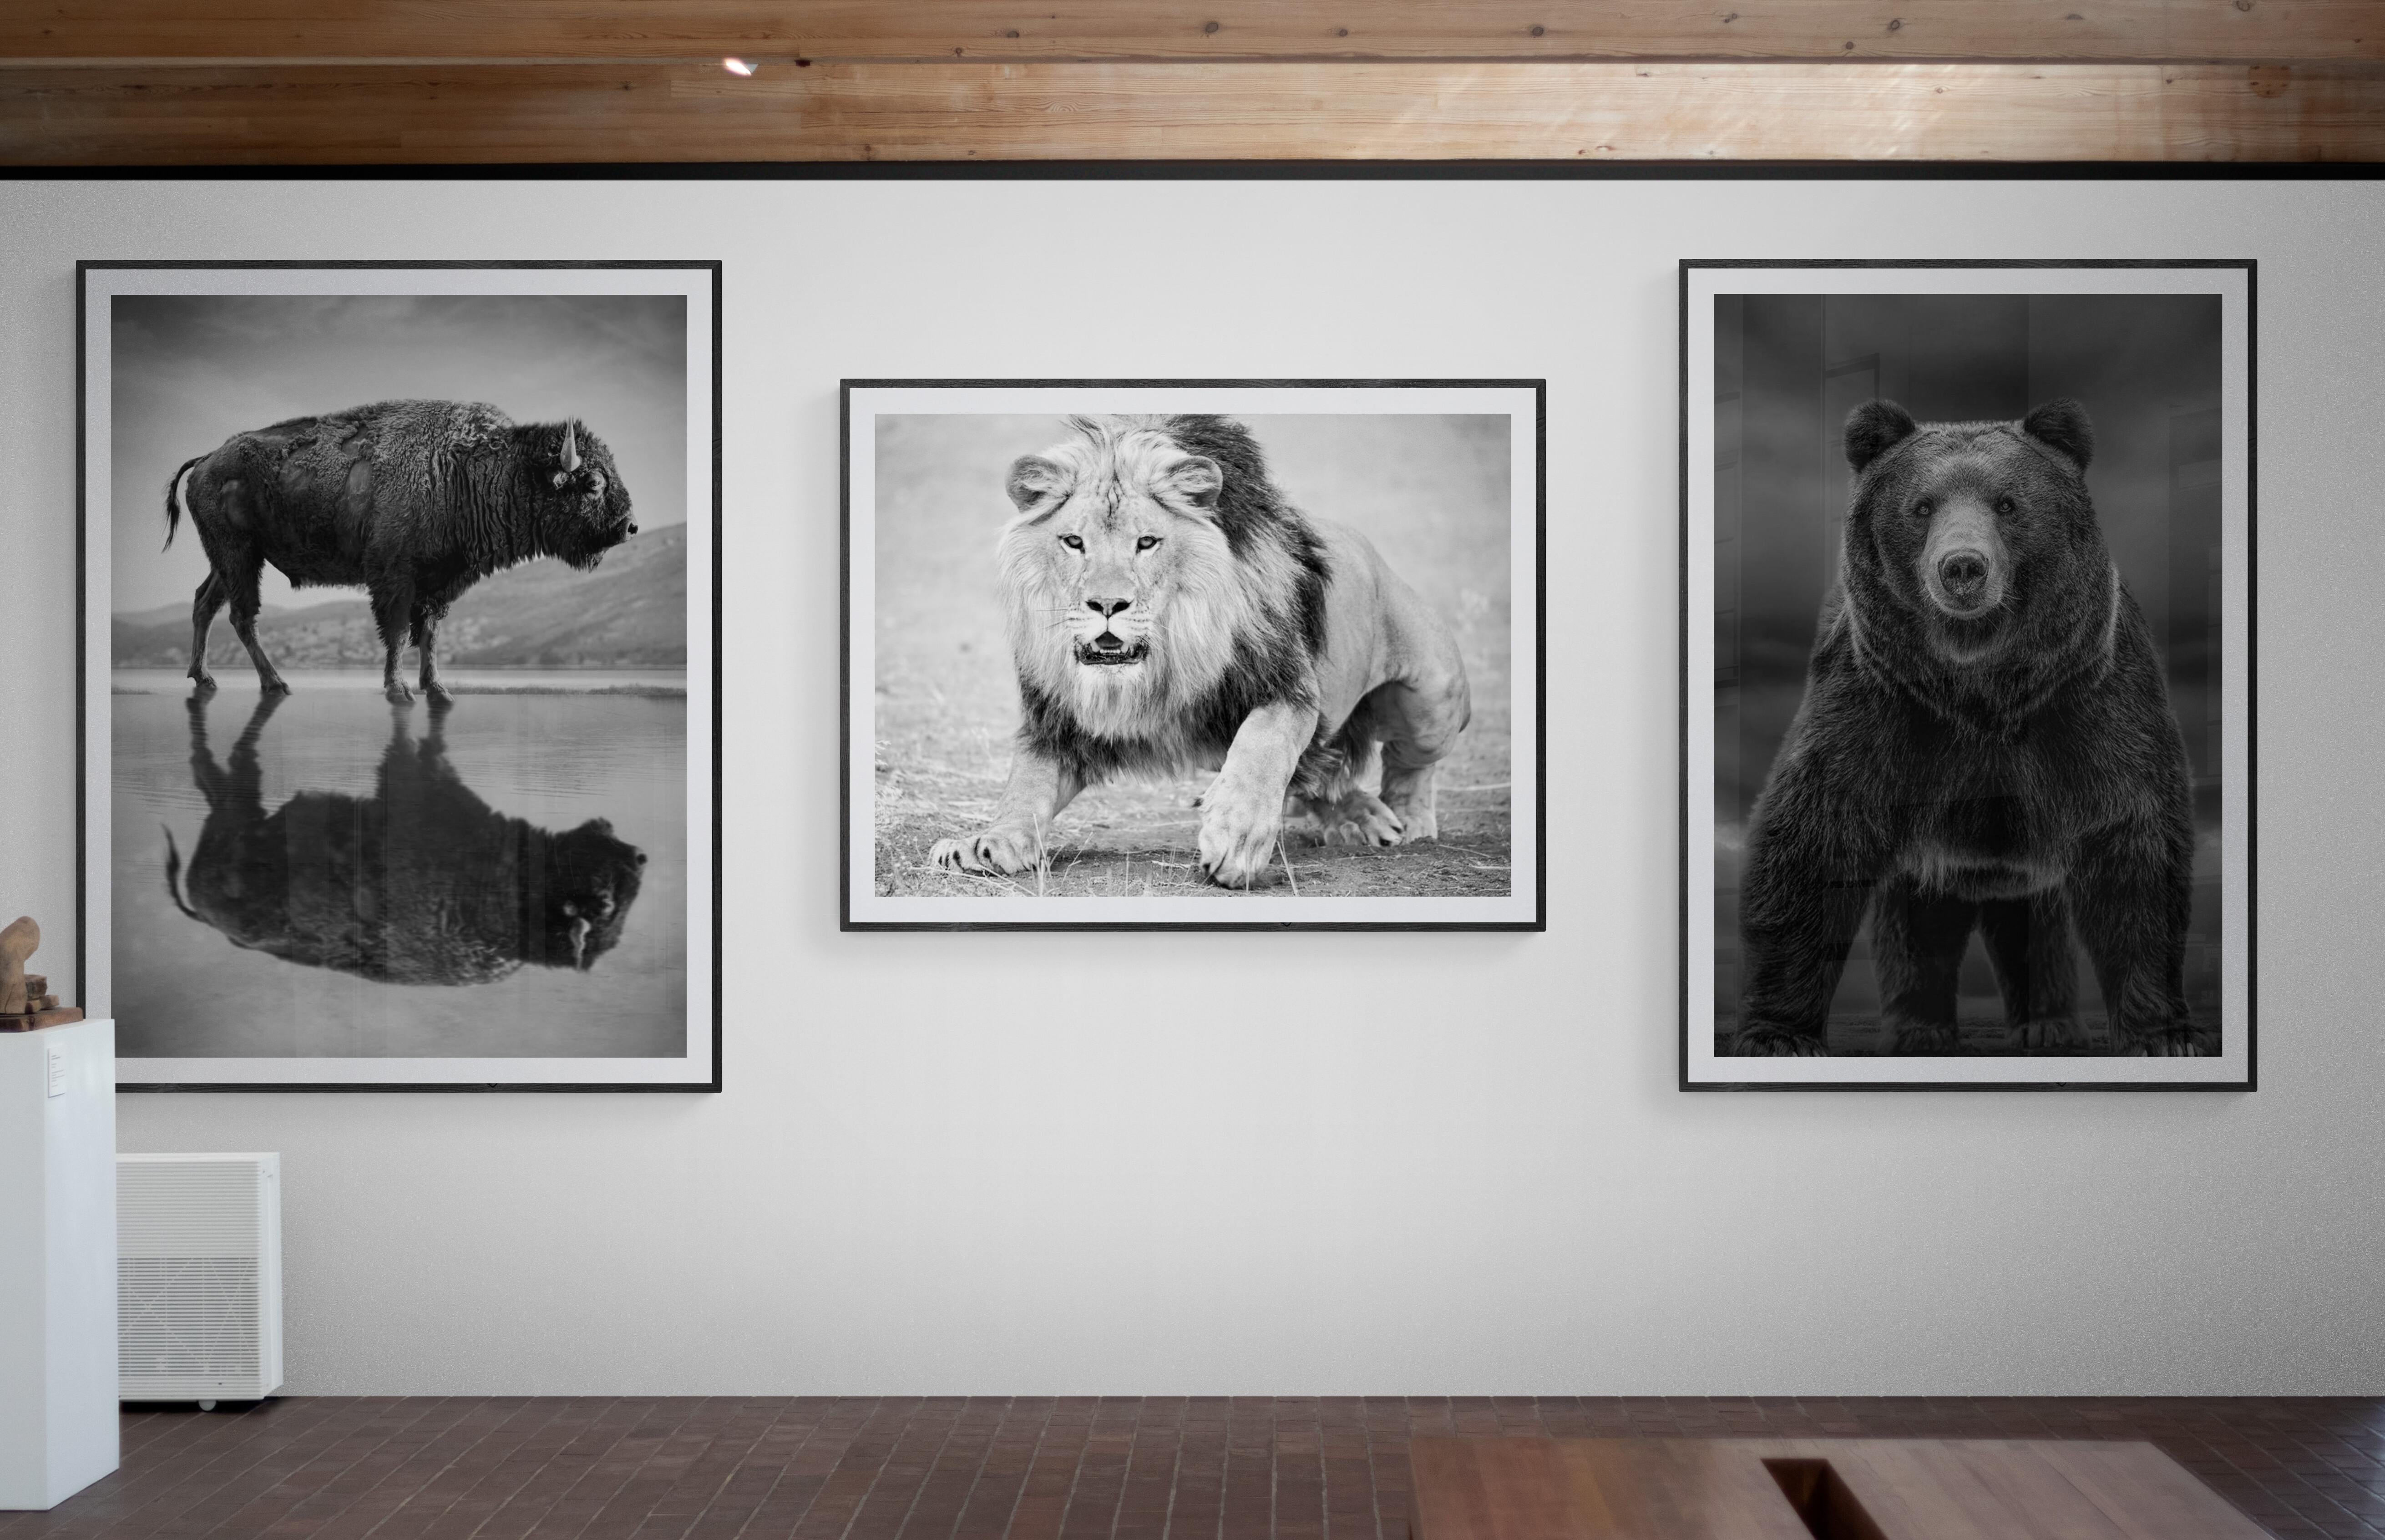 Times Like These 60x40 Black & White Photography, Kodiak, Bear Grizzly Unsigned  For Sale 4